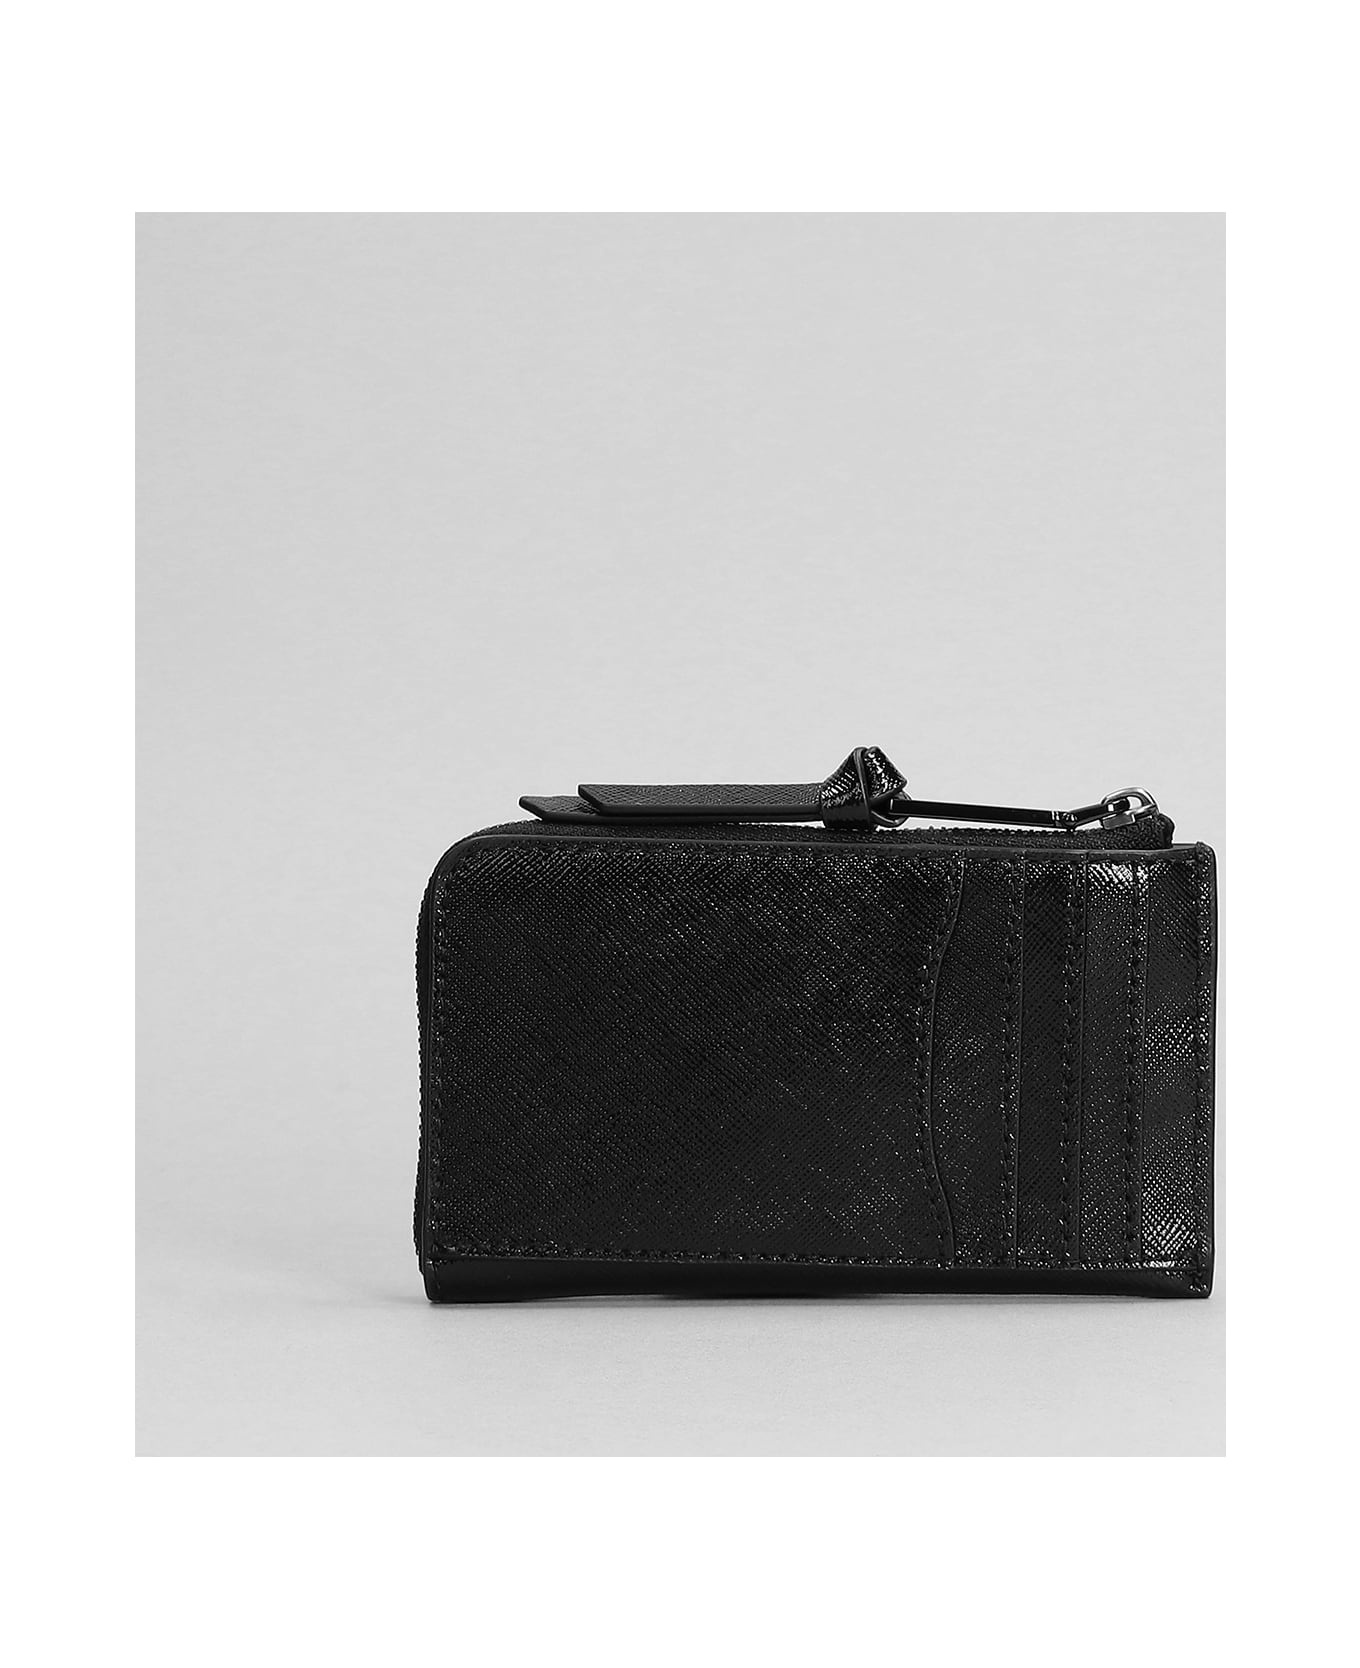 Marc Jacobs The Top Zip Multi Wallet In Black Leather - NERO